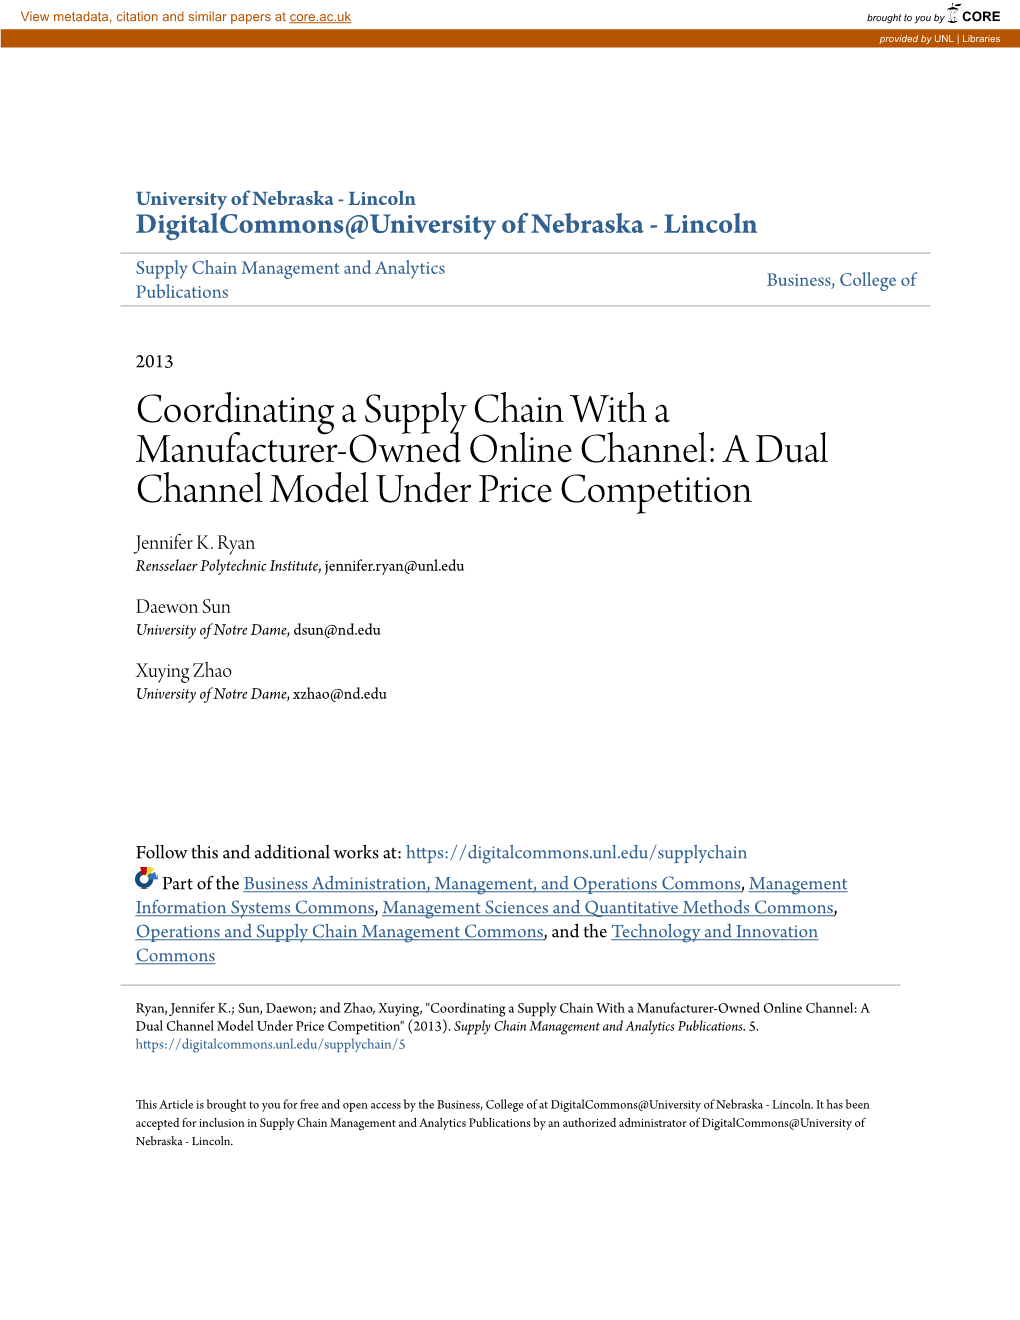 Coordinating a Supply Chain with a Manufacturer-Owned Online Channel: a Dual Channel Model Under Price Competition Jennifer K